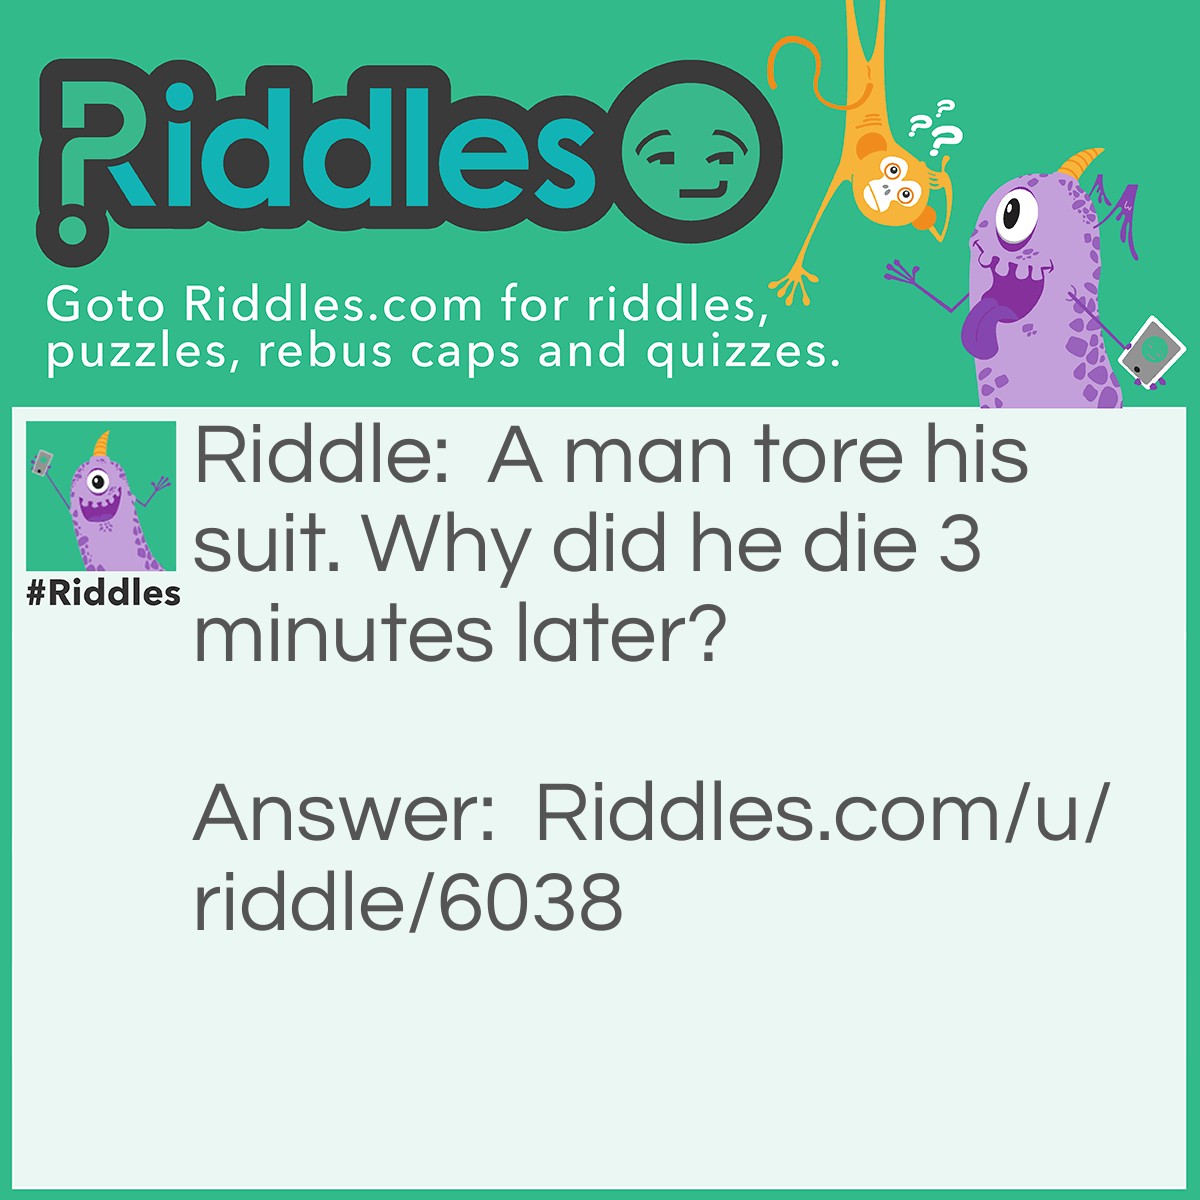 Riddle: A man tore his suit. Why did he die 3 minutes later? Answer: He was in Outer Space.